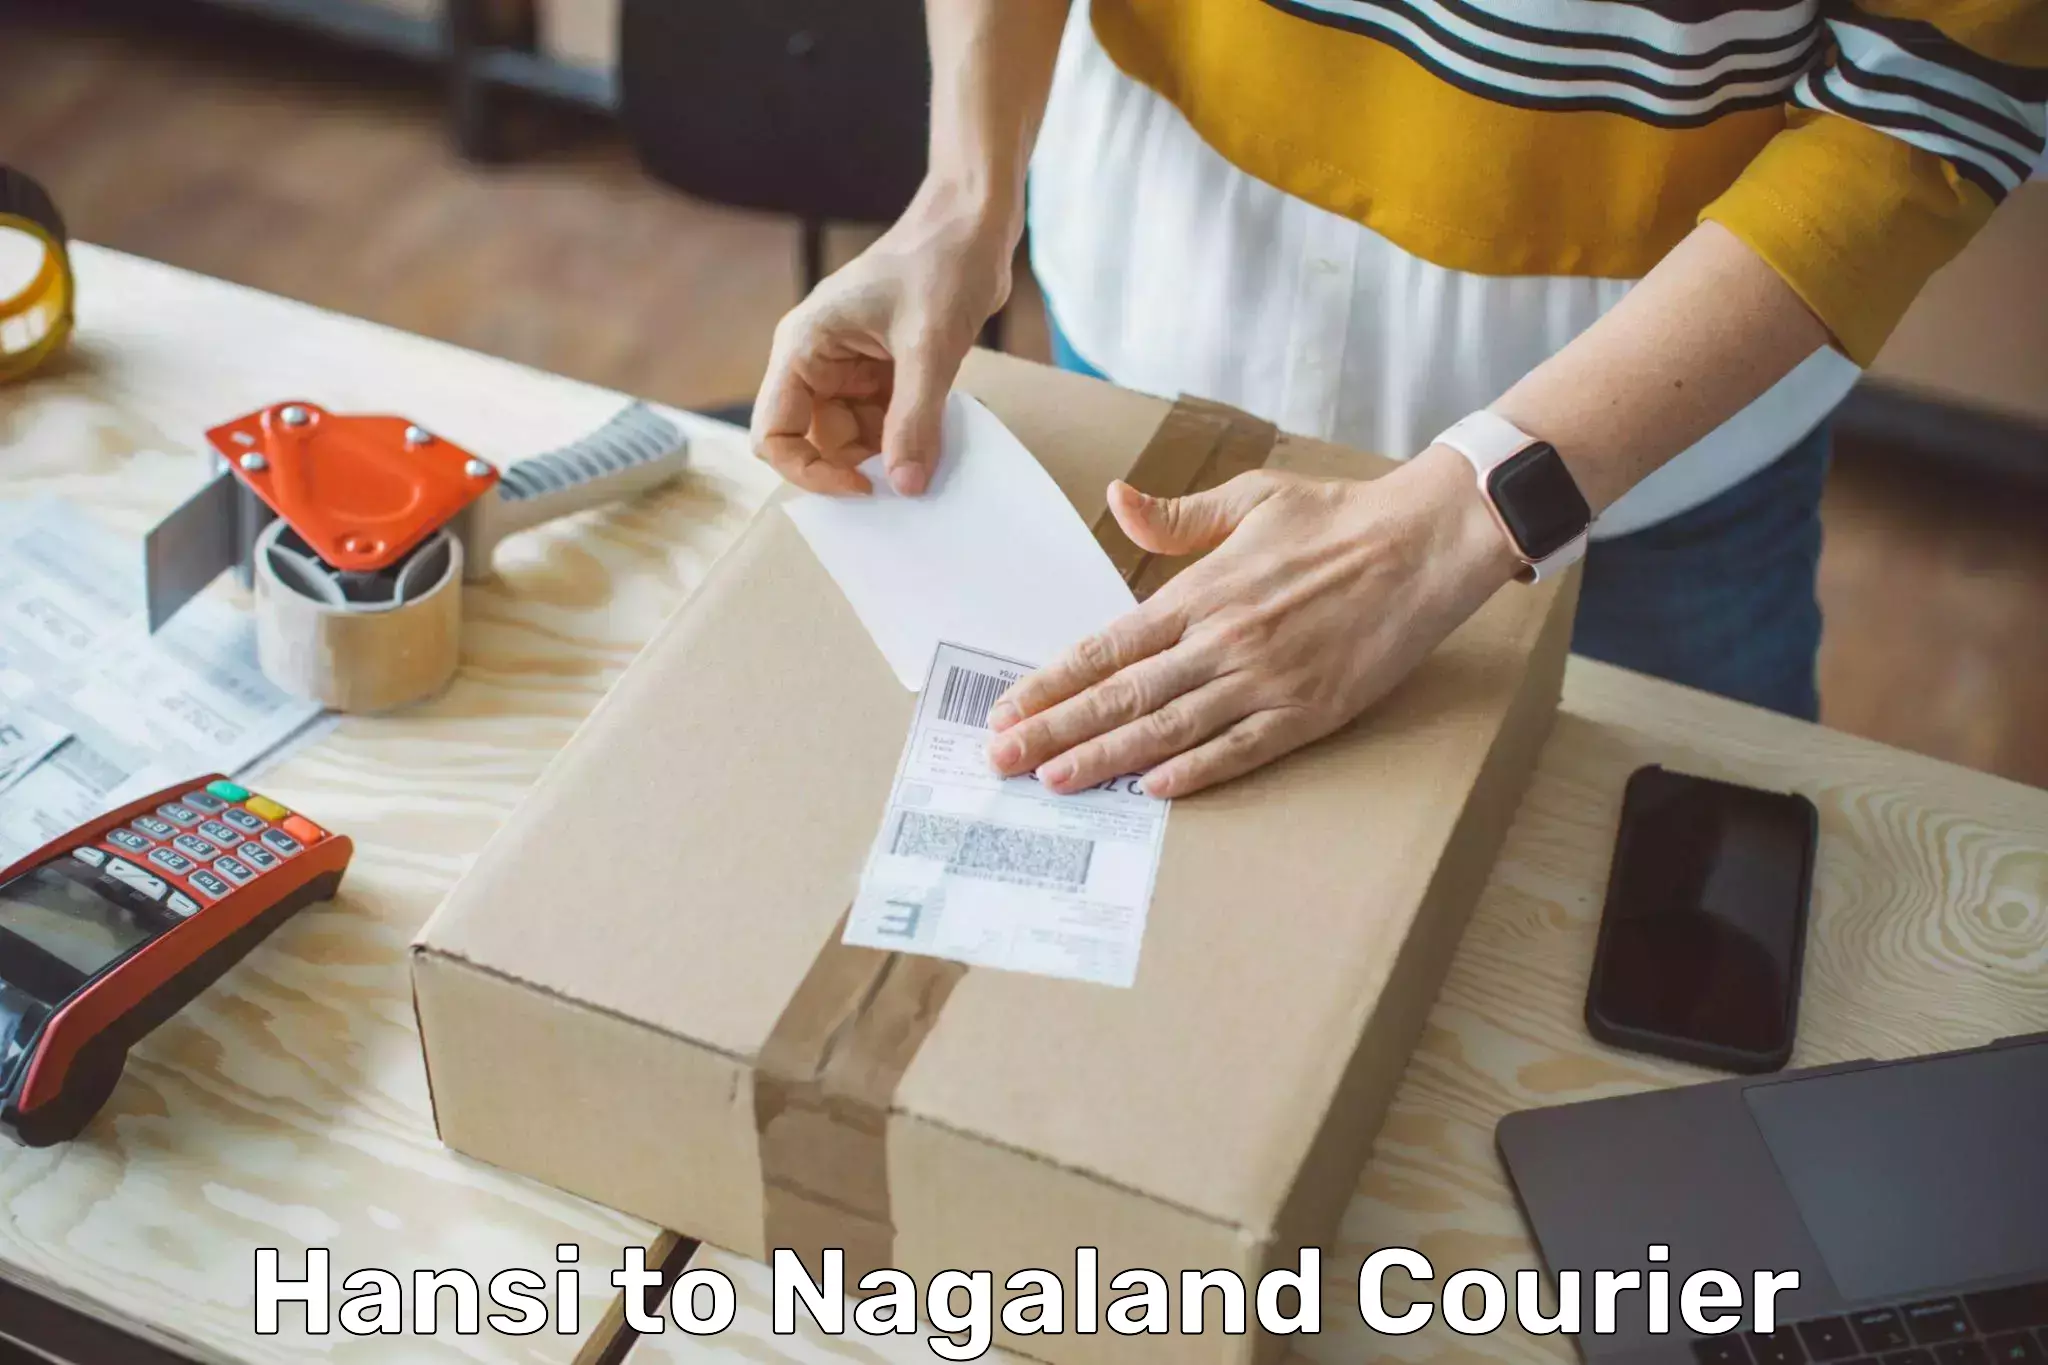 Customizable delivery plans Hansi to Nagaland